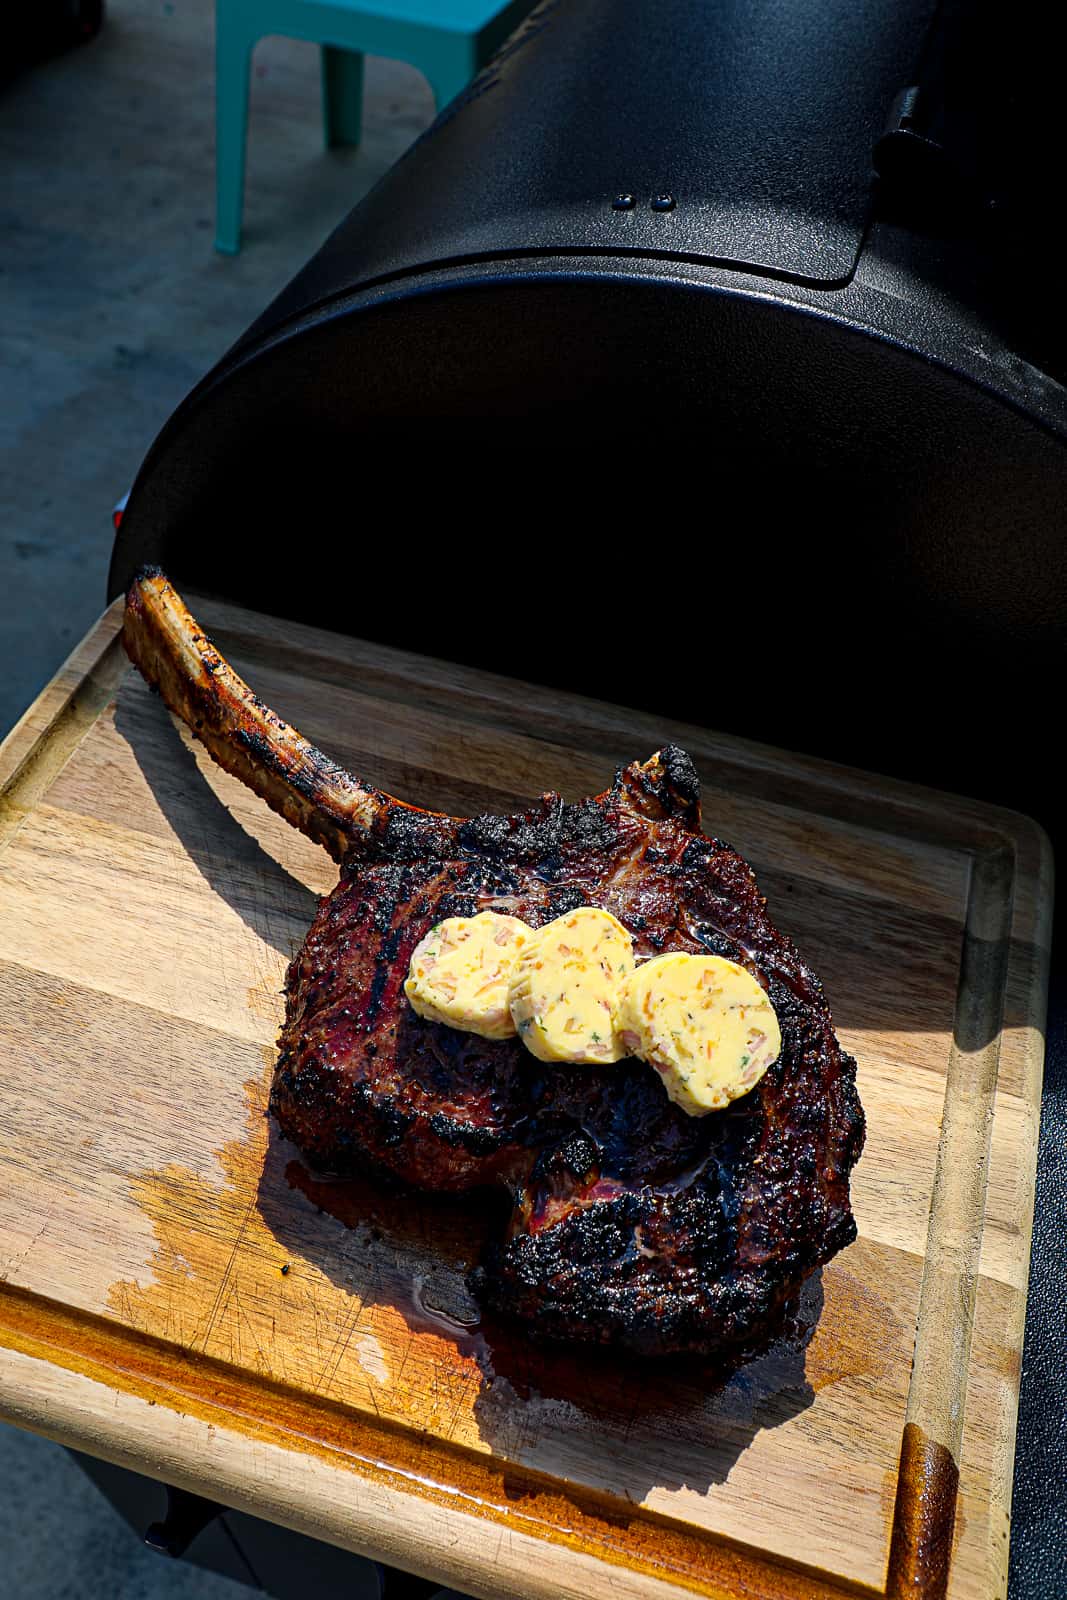 Traeger Smoked Tomahawk Steak With Compound Butter On The Traeger